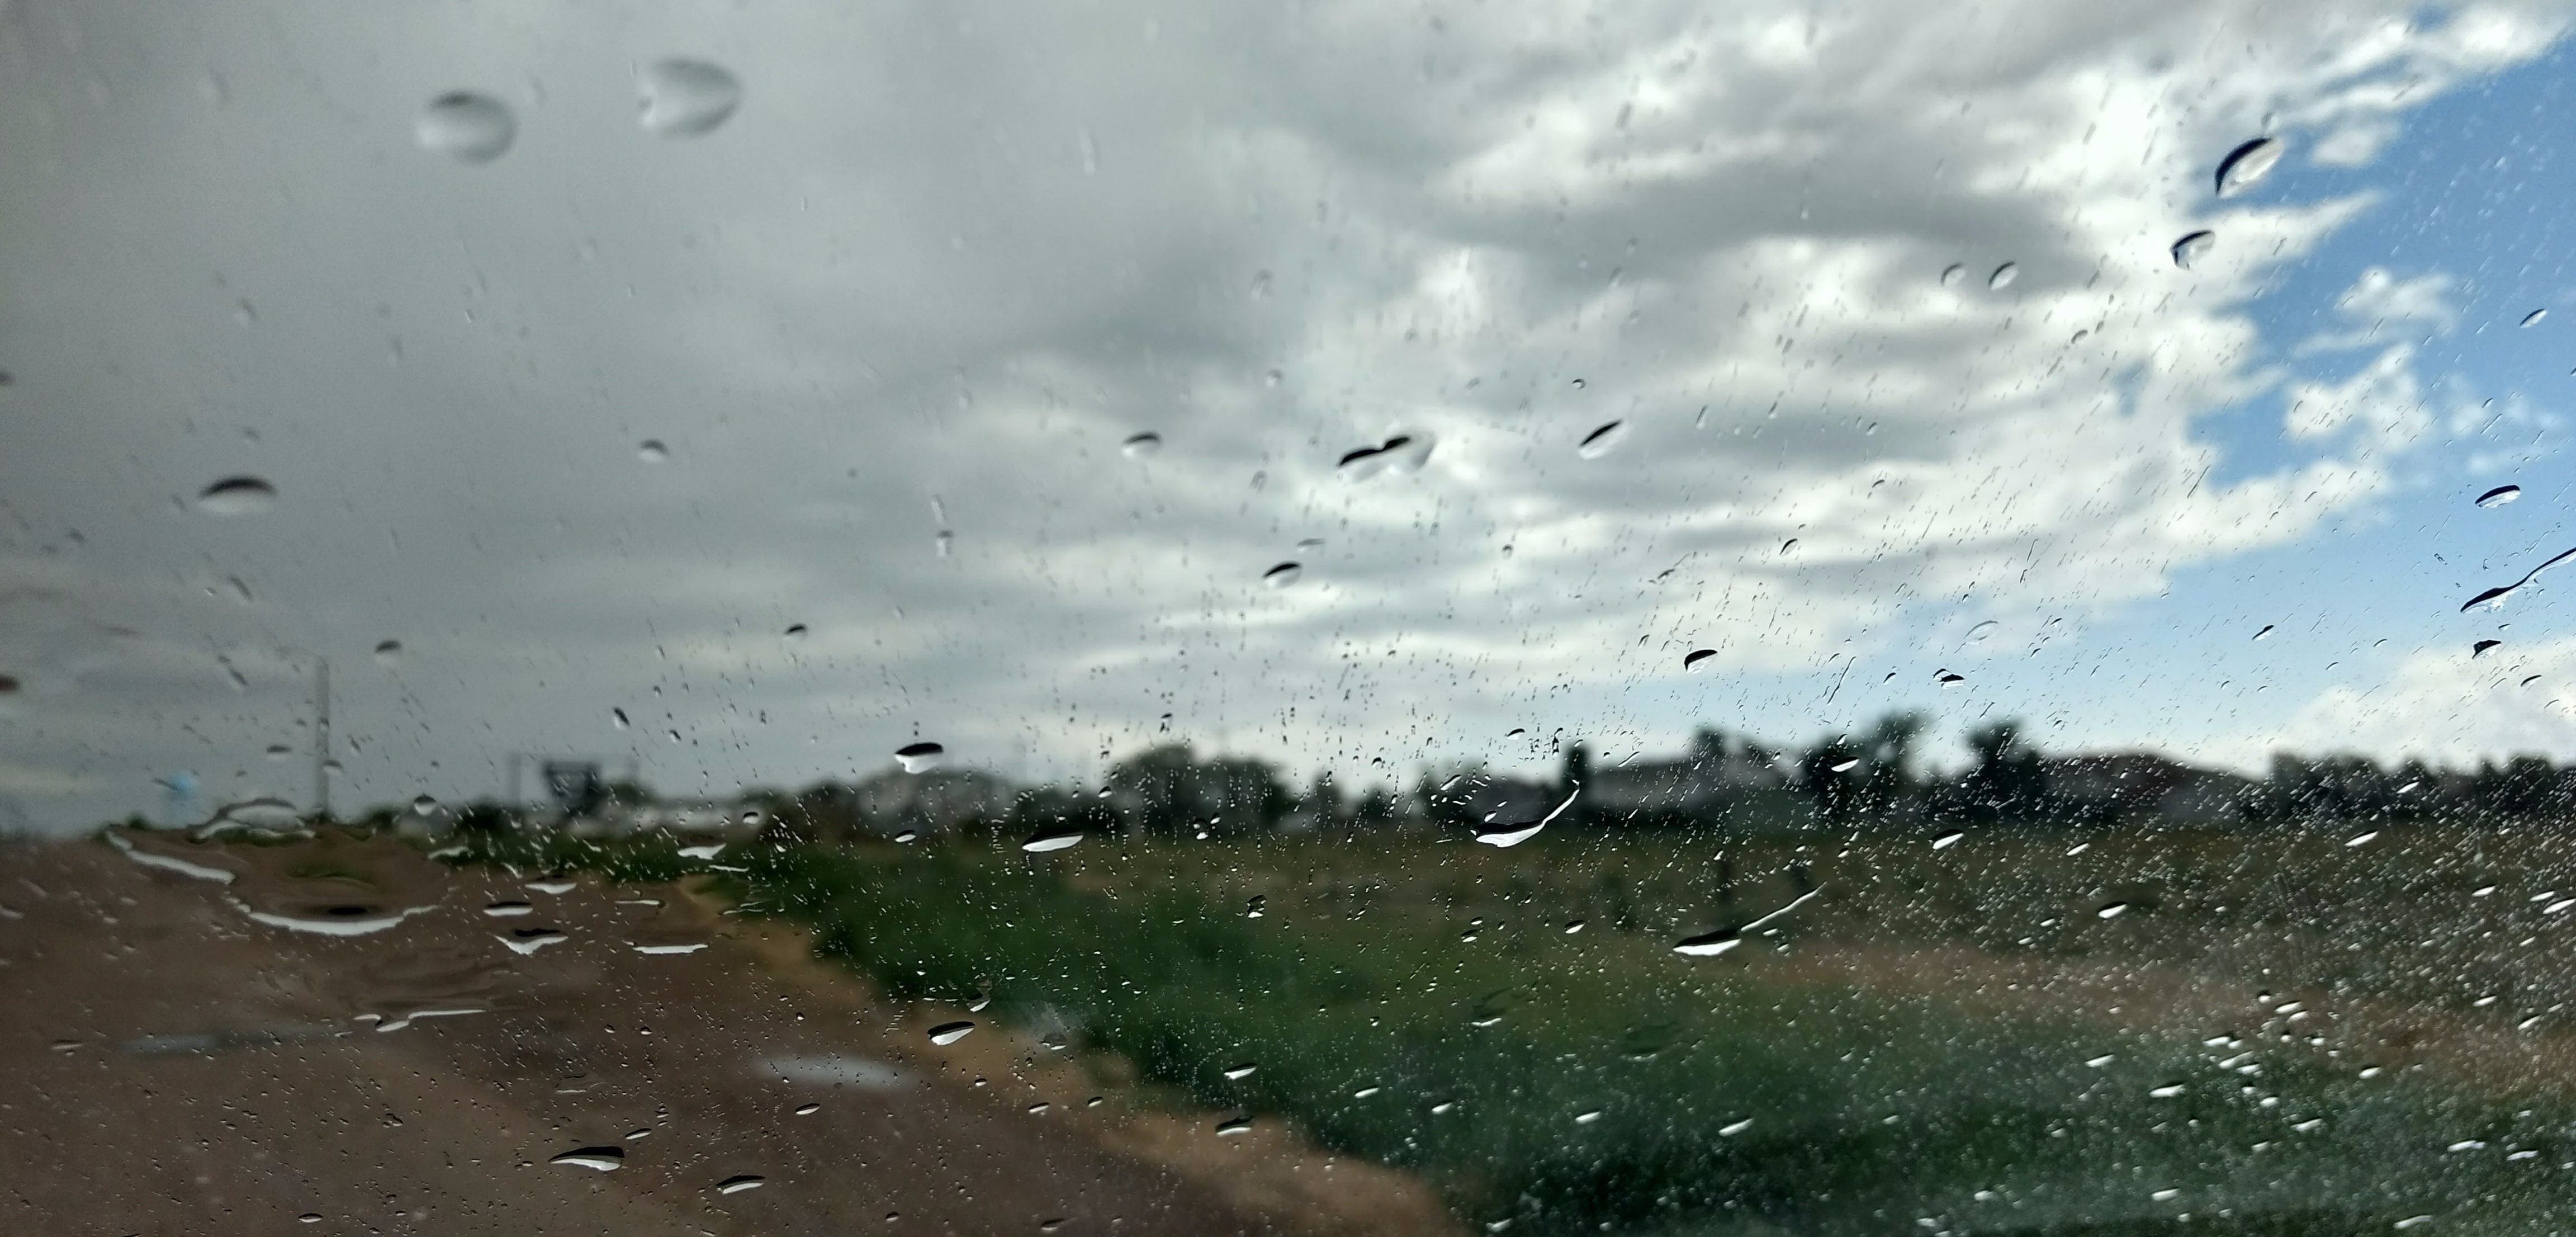 raindrops on a windscreen, a city's horizon visible in background